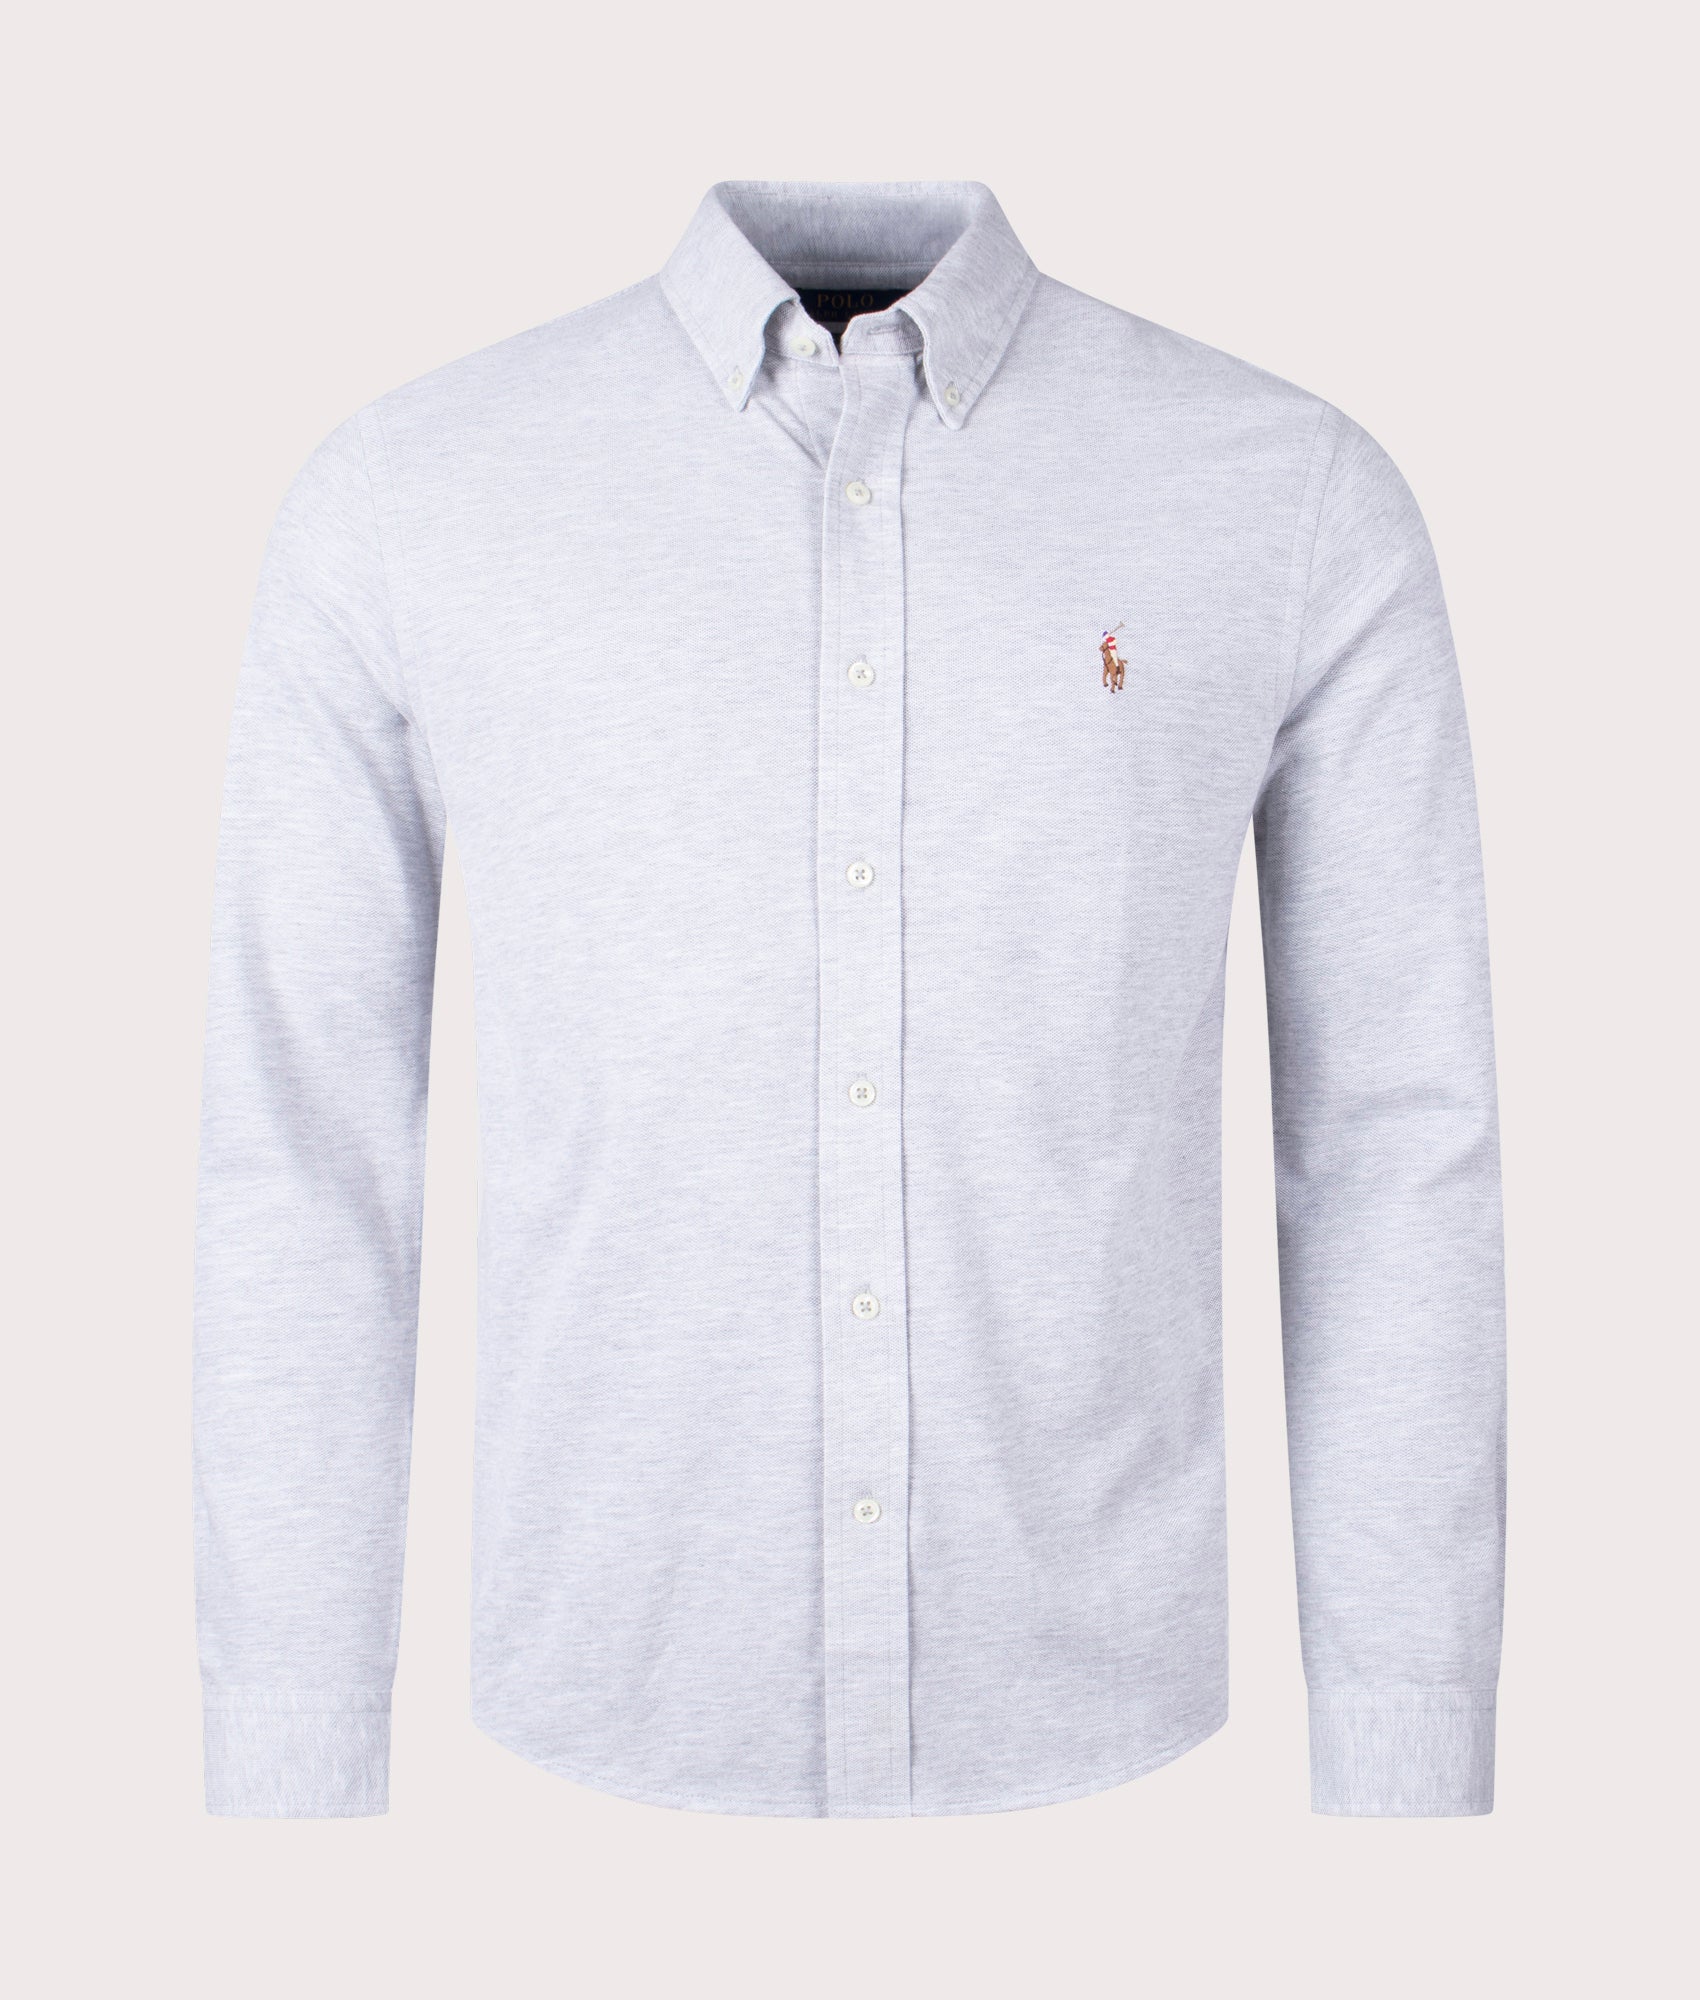 Polo Ralph Lauren Mens Knit Oxford Shirt - Colour: 004 Andover Heather/Multi PP - Size: Small